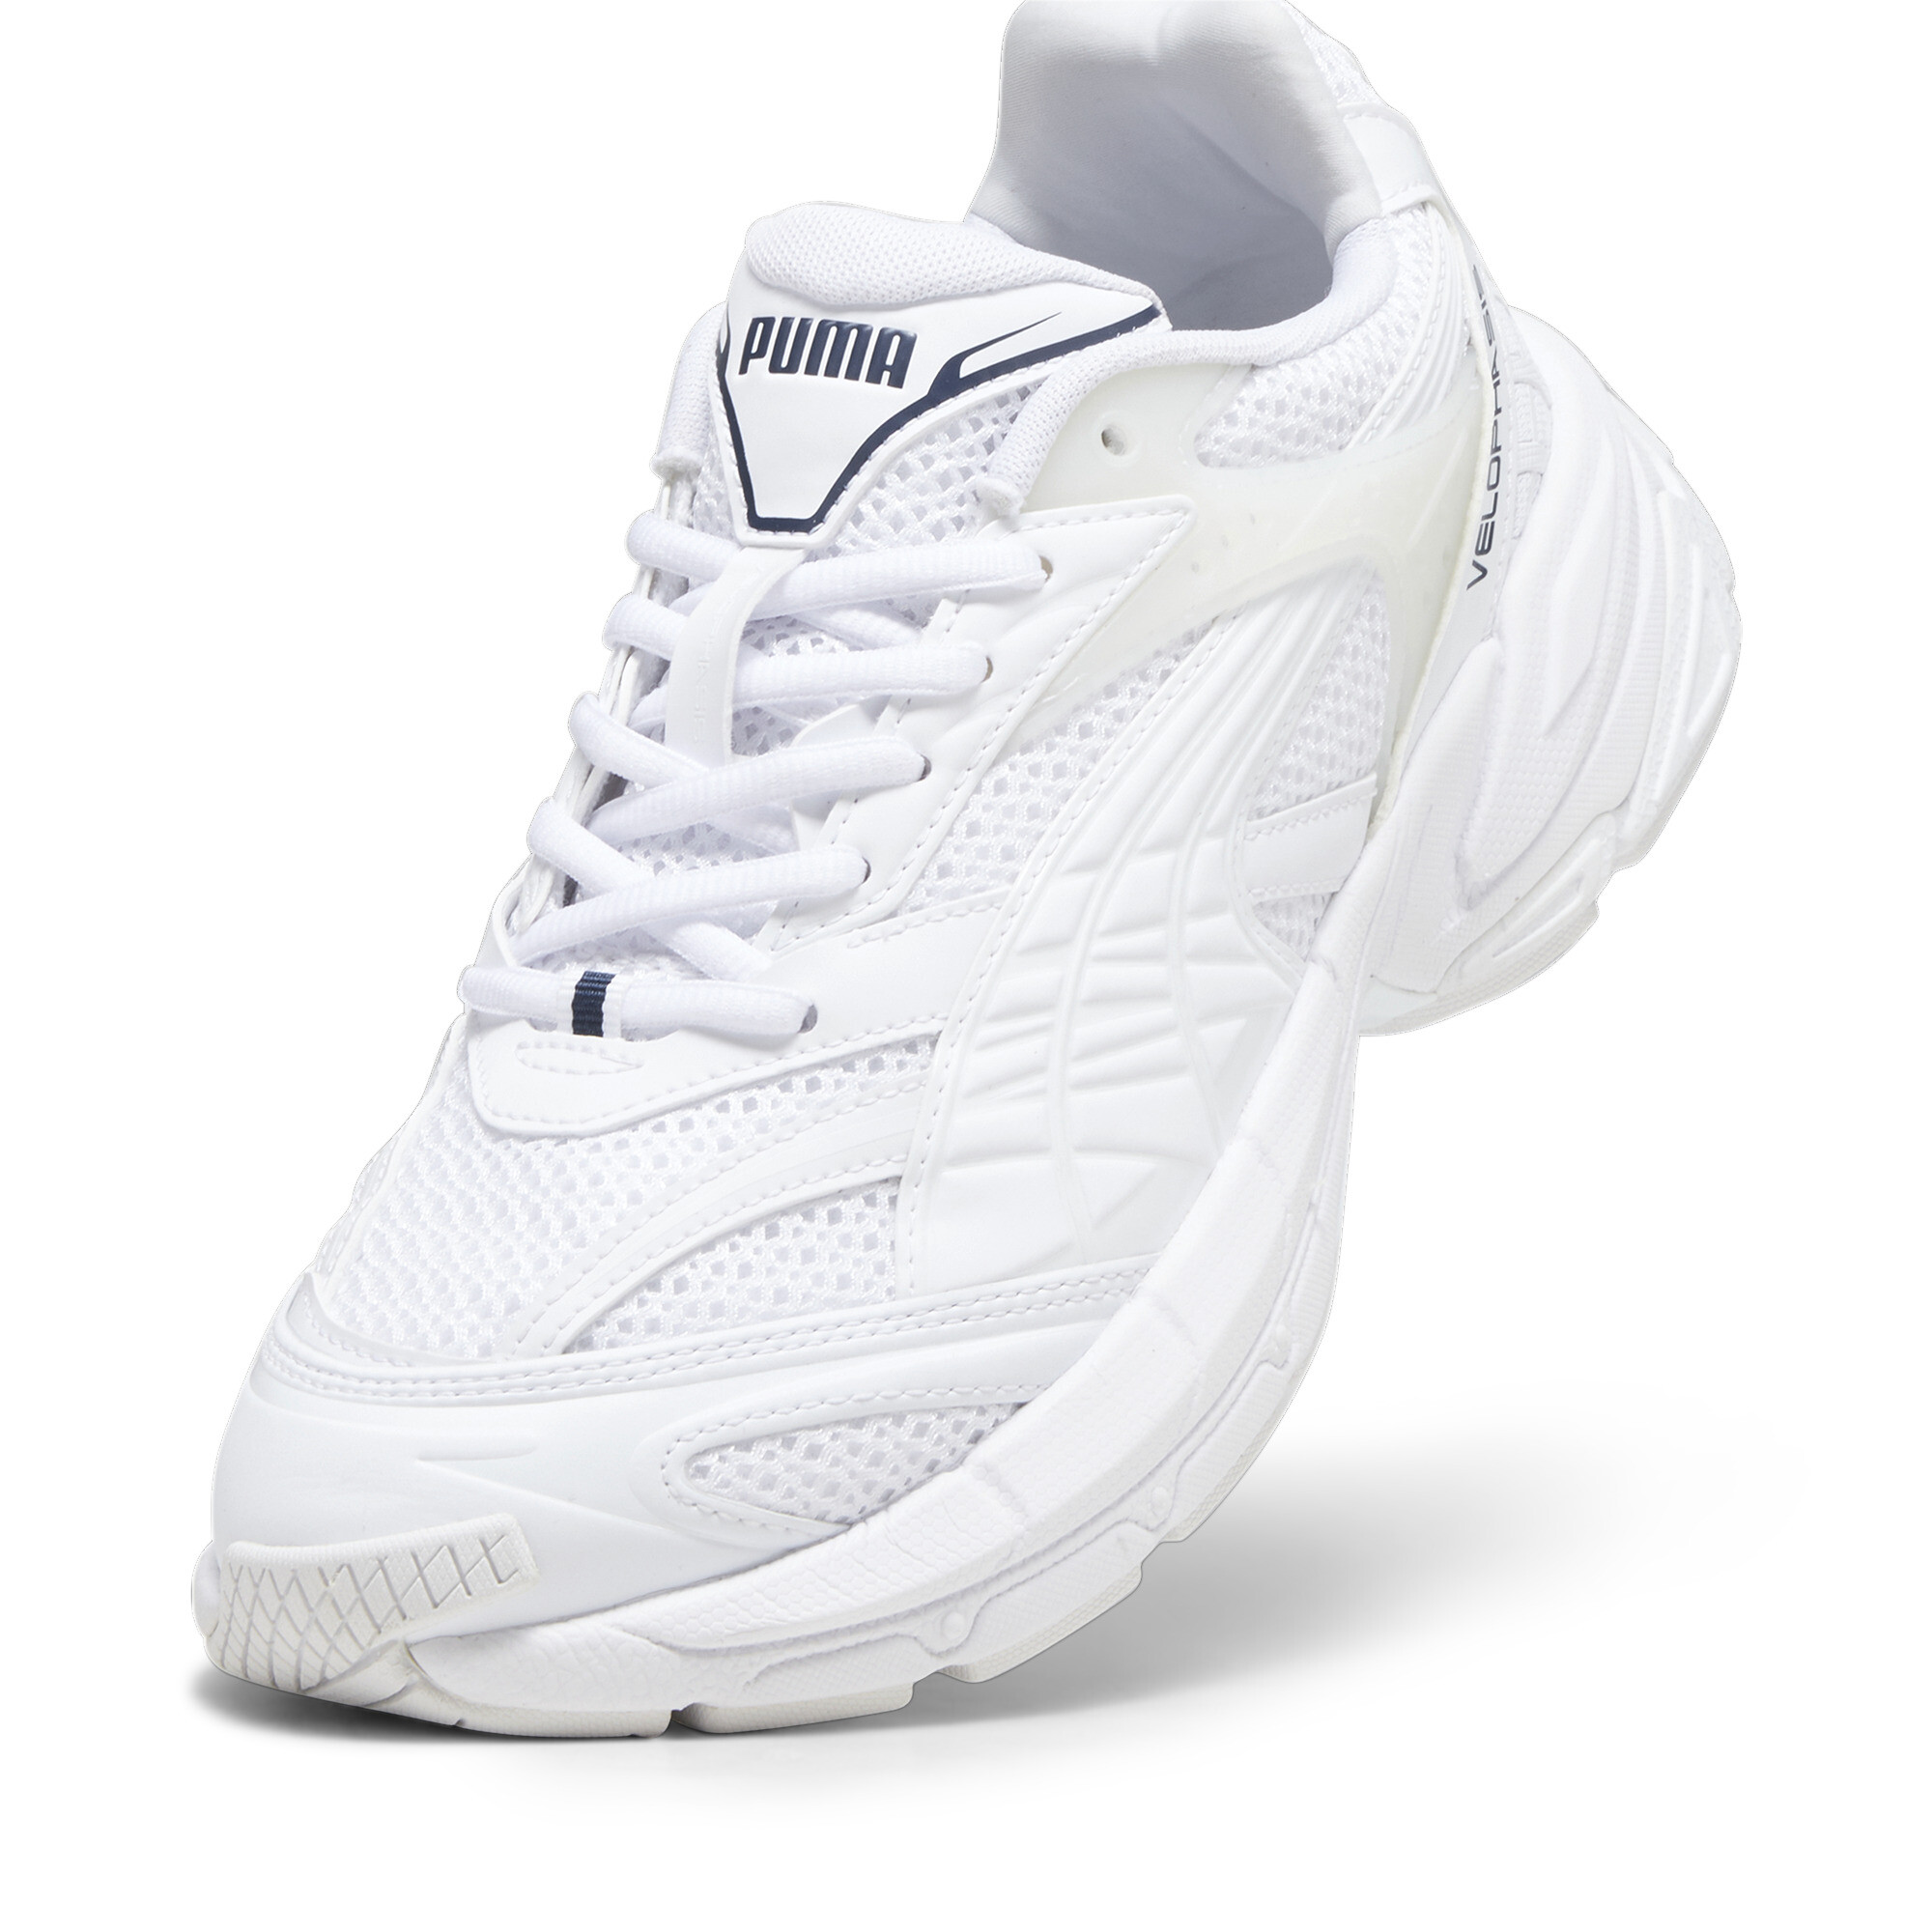 Puma Velophasis Technisch Sneakers, White, Size 43, Shoes